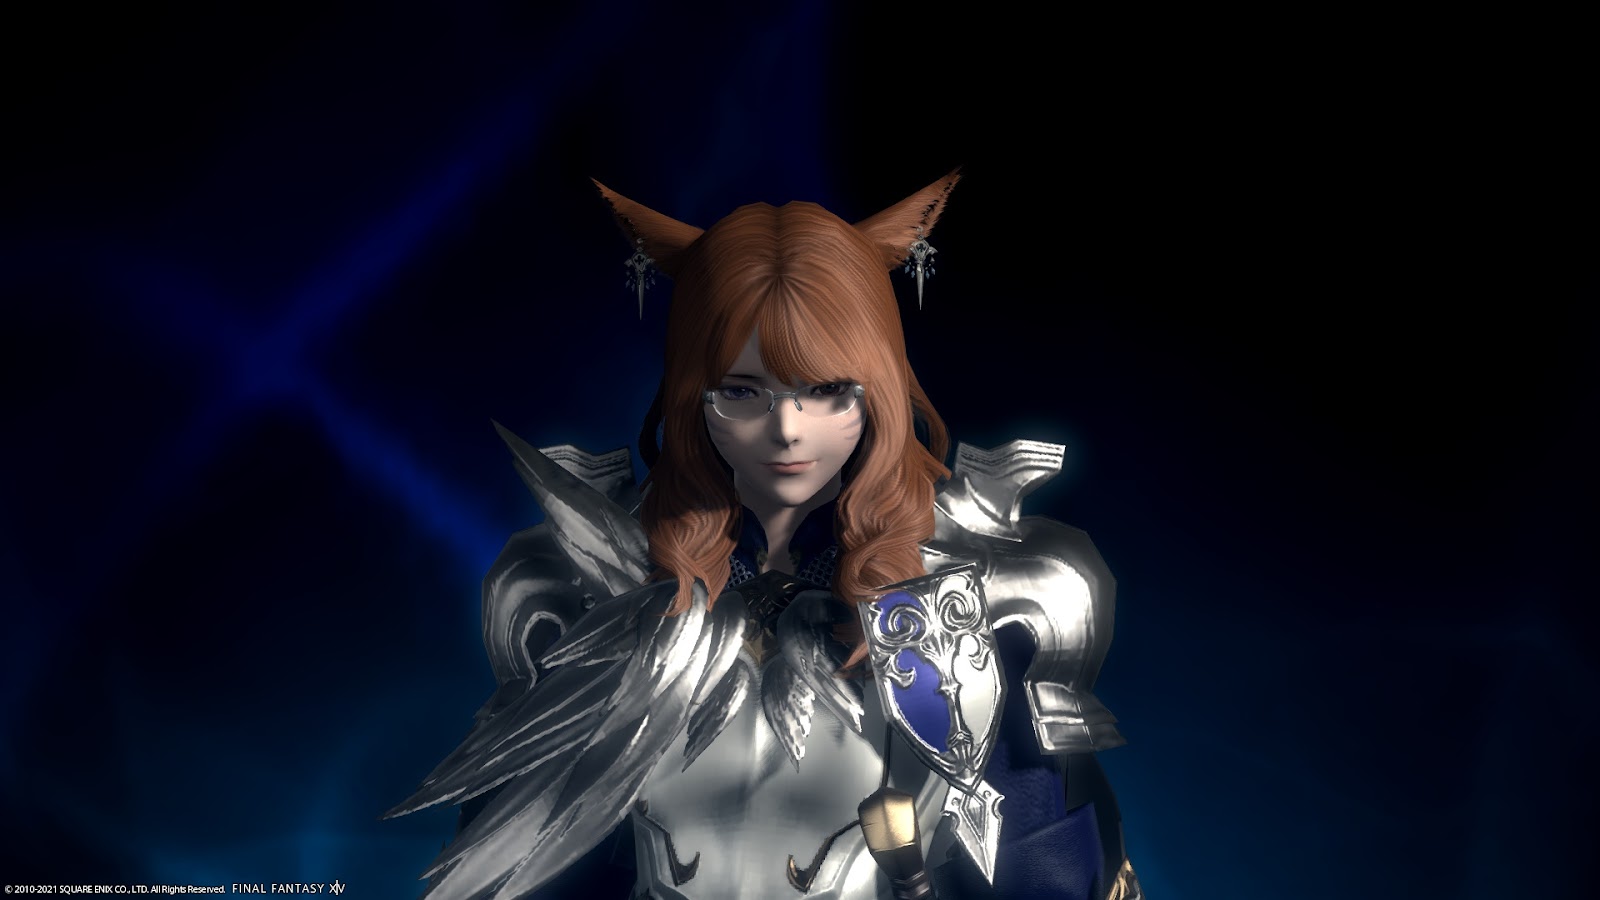 A female Final Fantasy XIV character with fox ears, glasses, and armor.